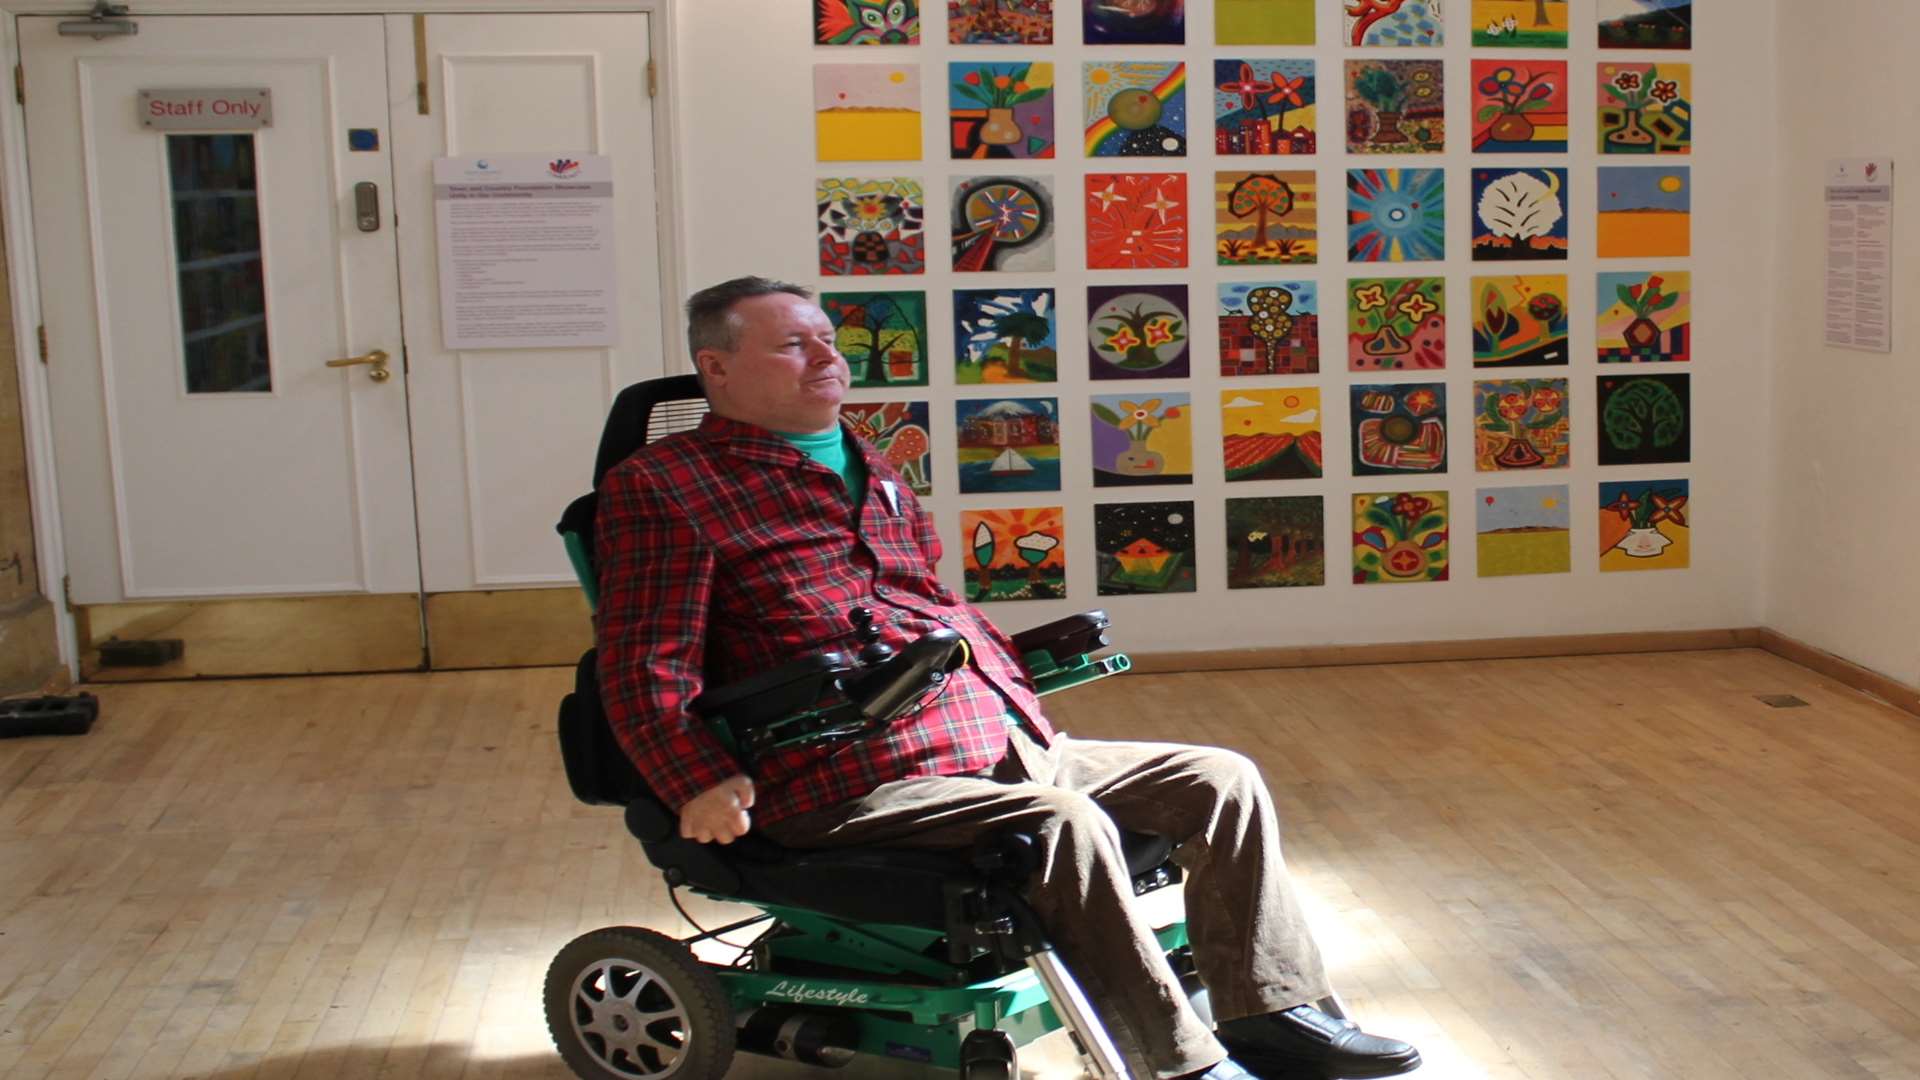 Roger Pedrick also unveiled an exhibition at the Trinity Theatre last year